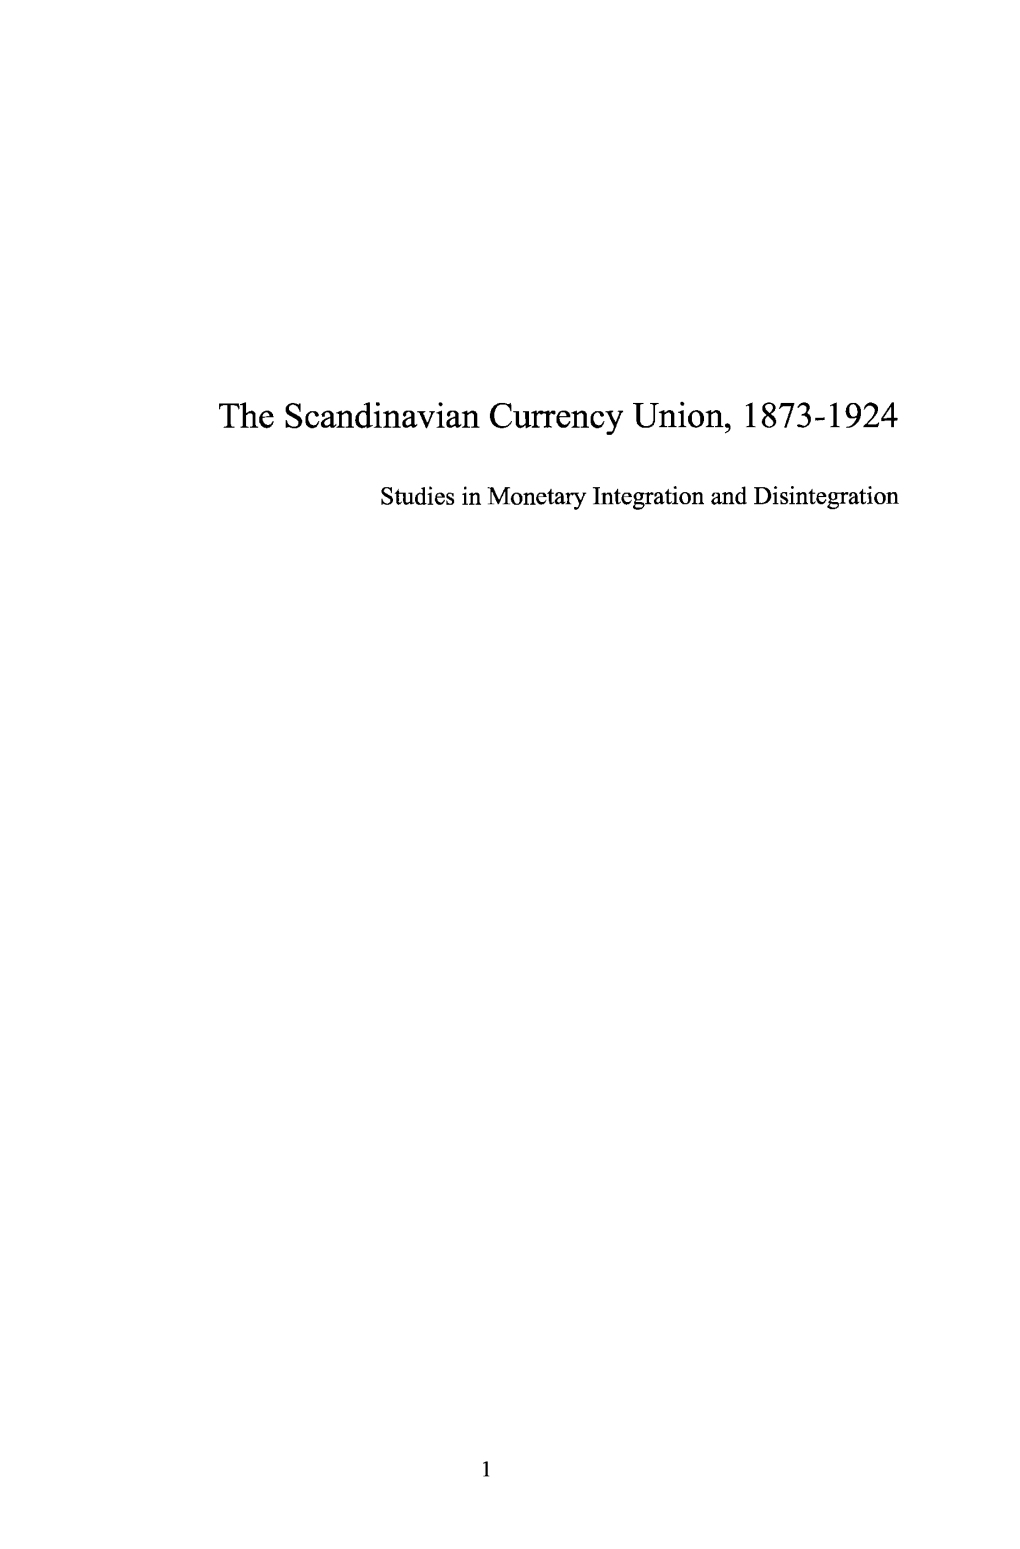 The Scandinavian Currency Union, 1873-1924